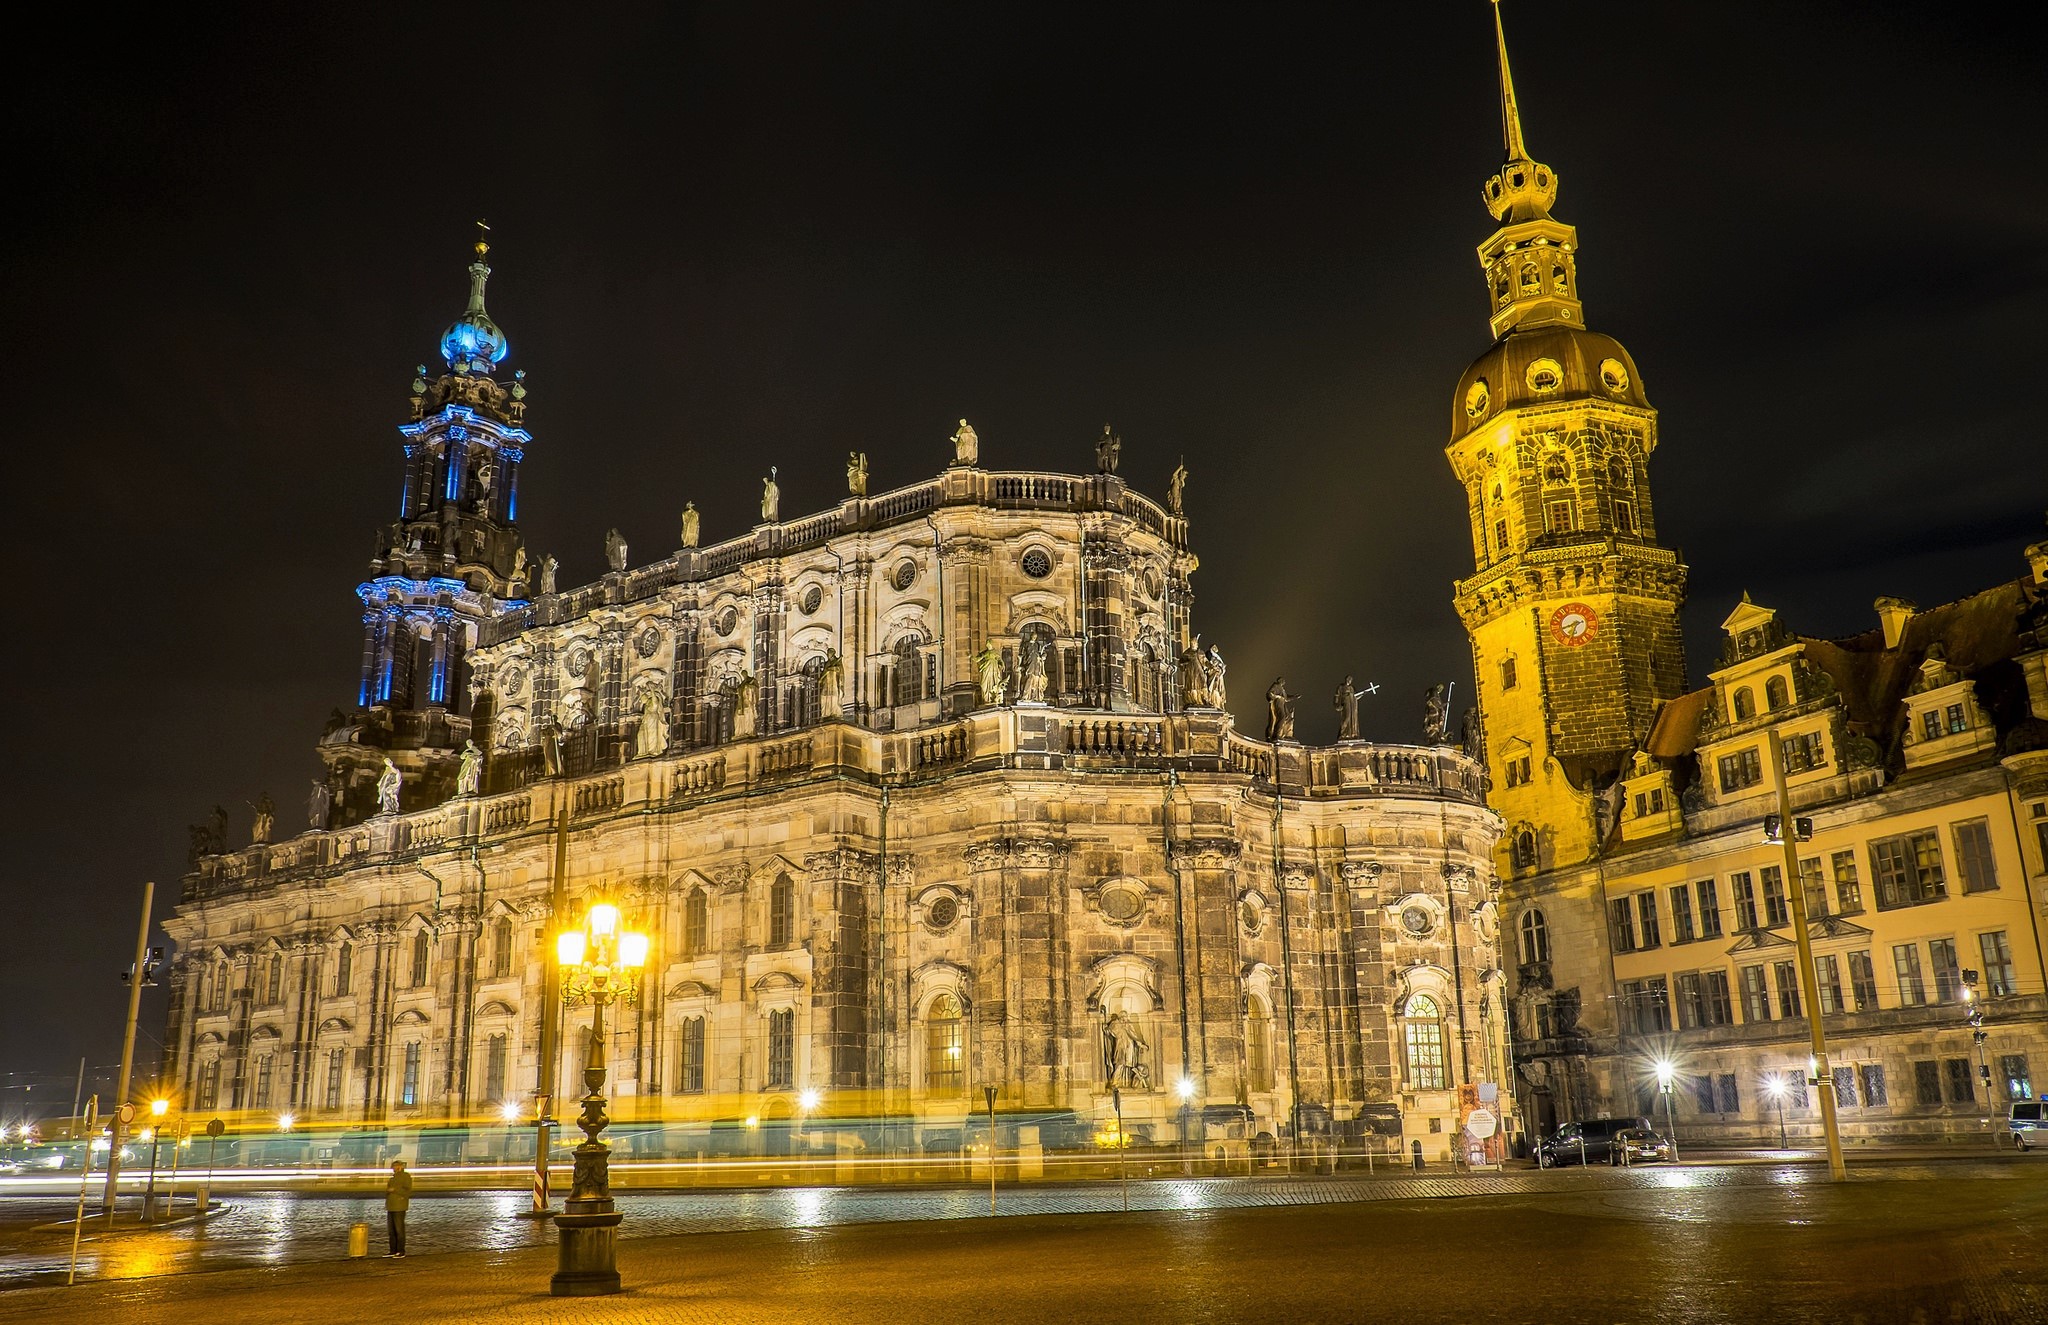 cities, man made, dresden, architecture, building, light, night